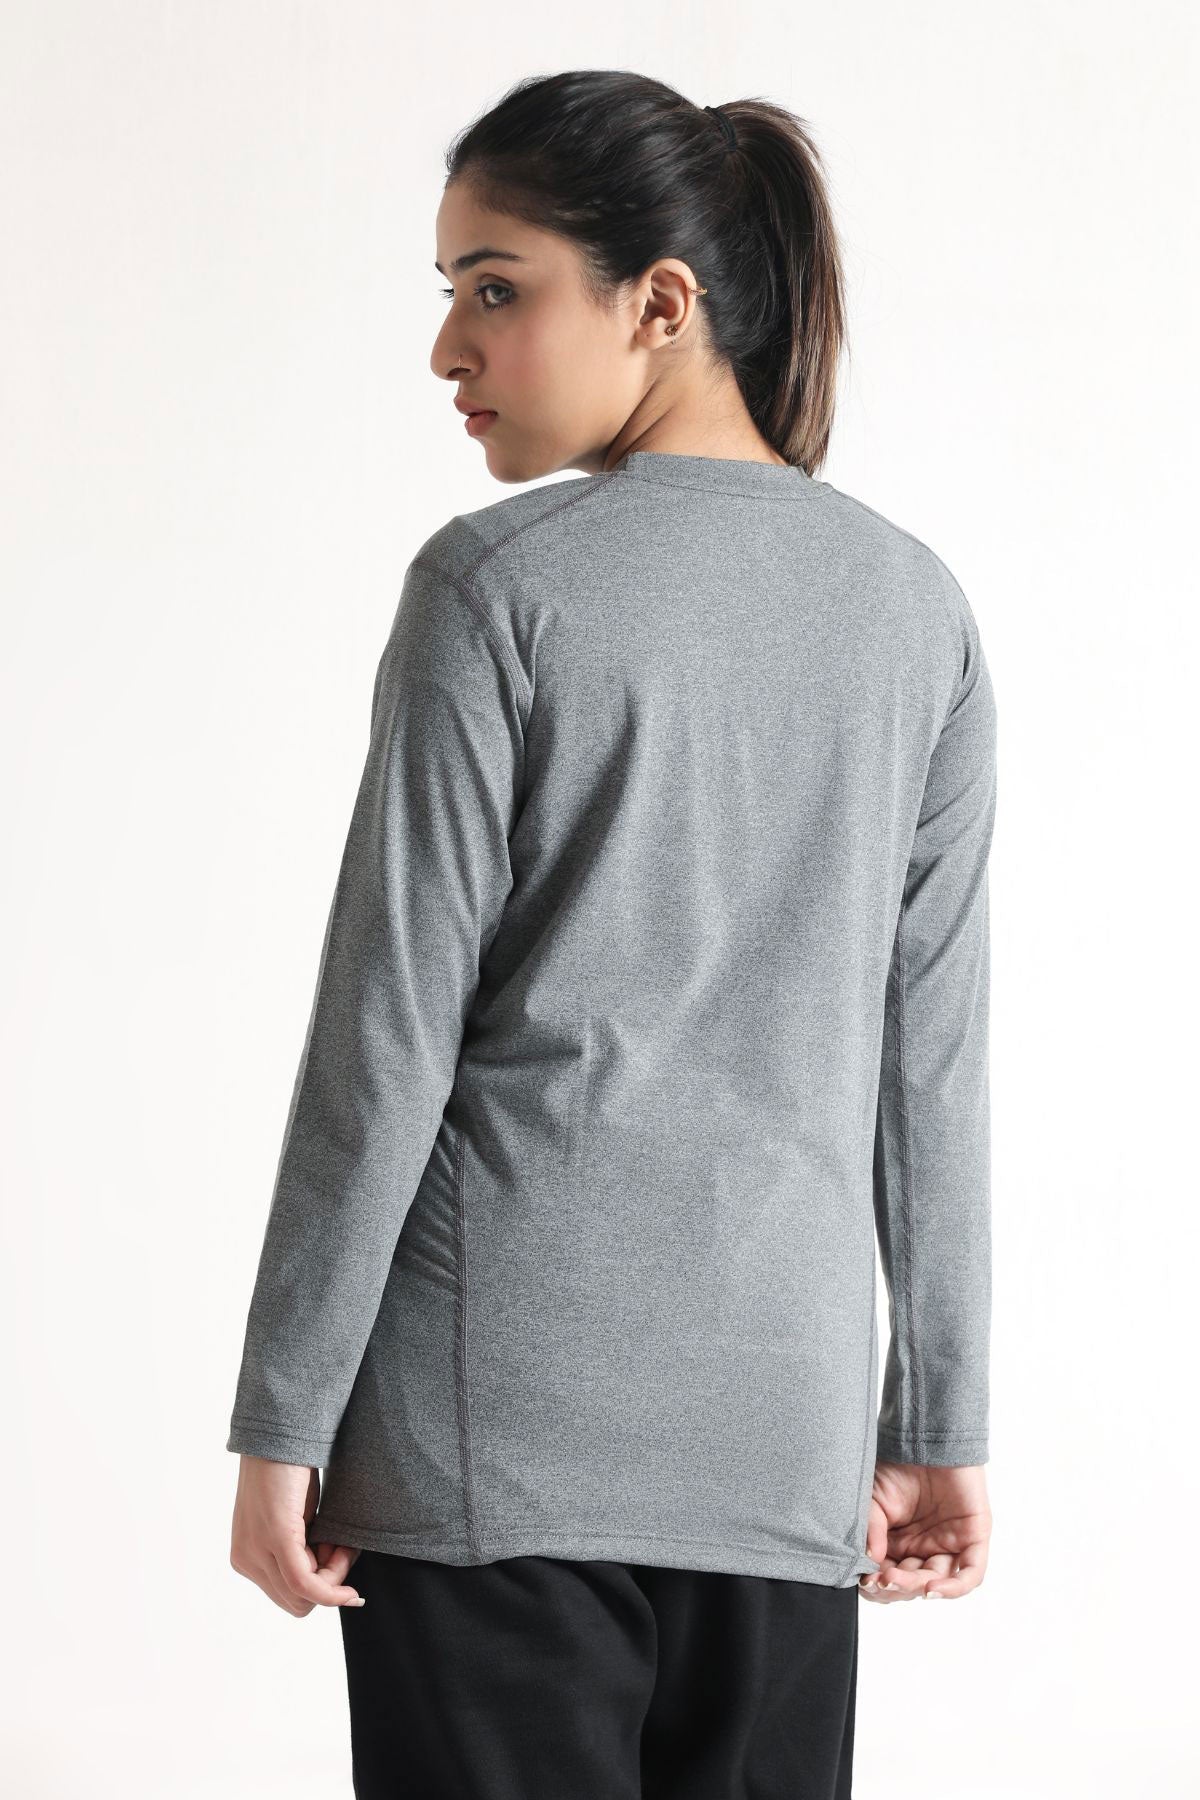 SIGNATURE LONG SLEEVED STRAIGHT CUT TEE- LIGHT GREY - The Orion Fit